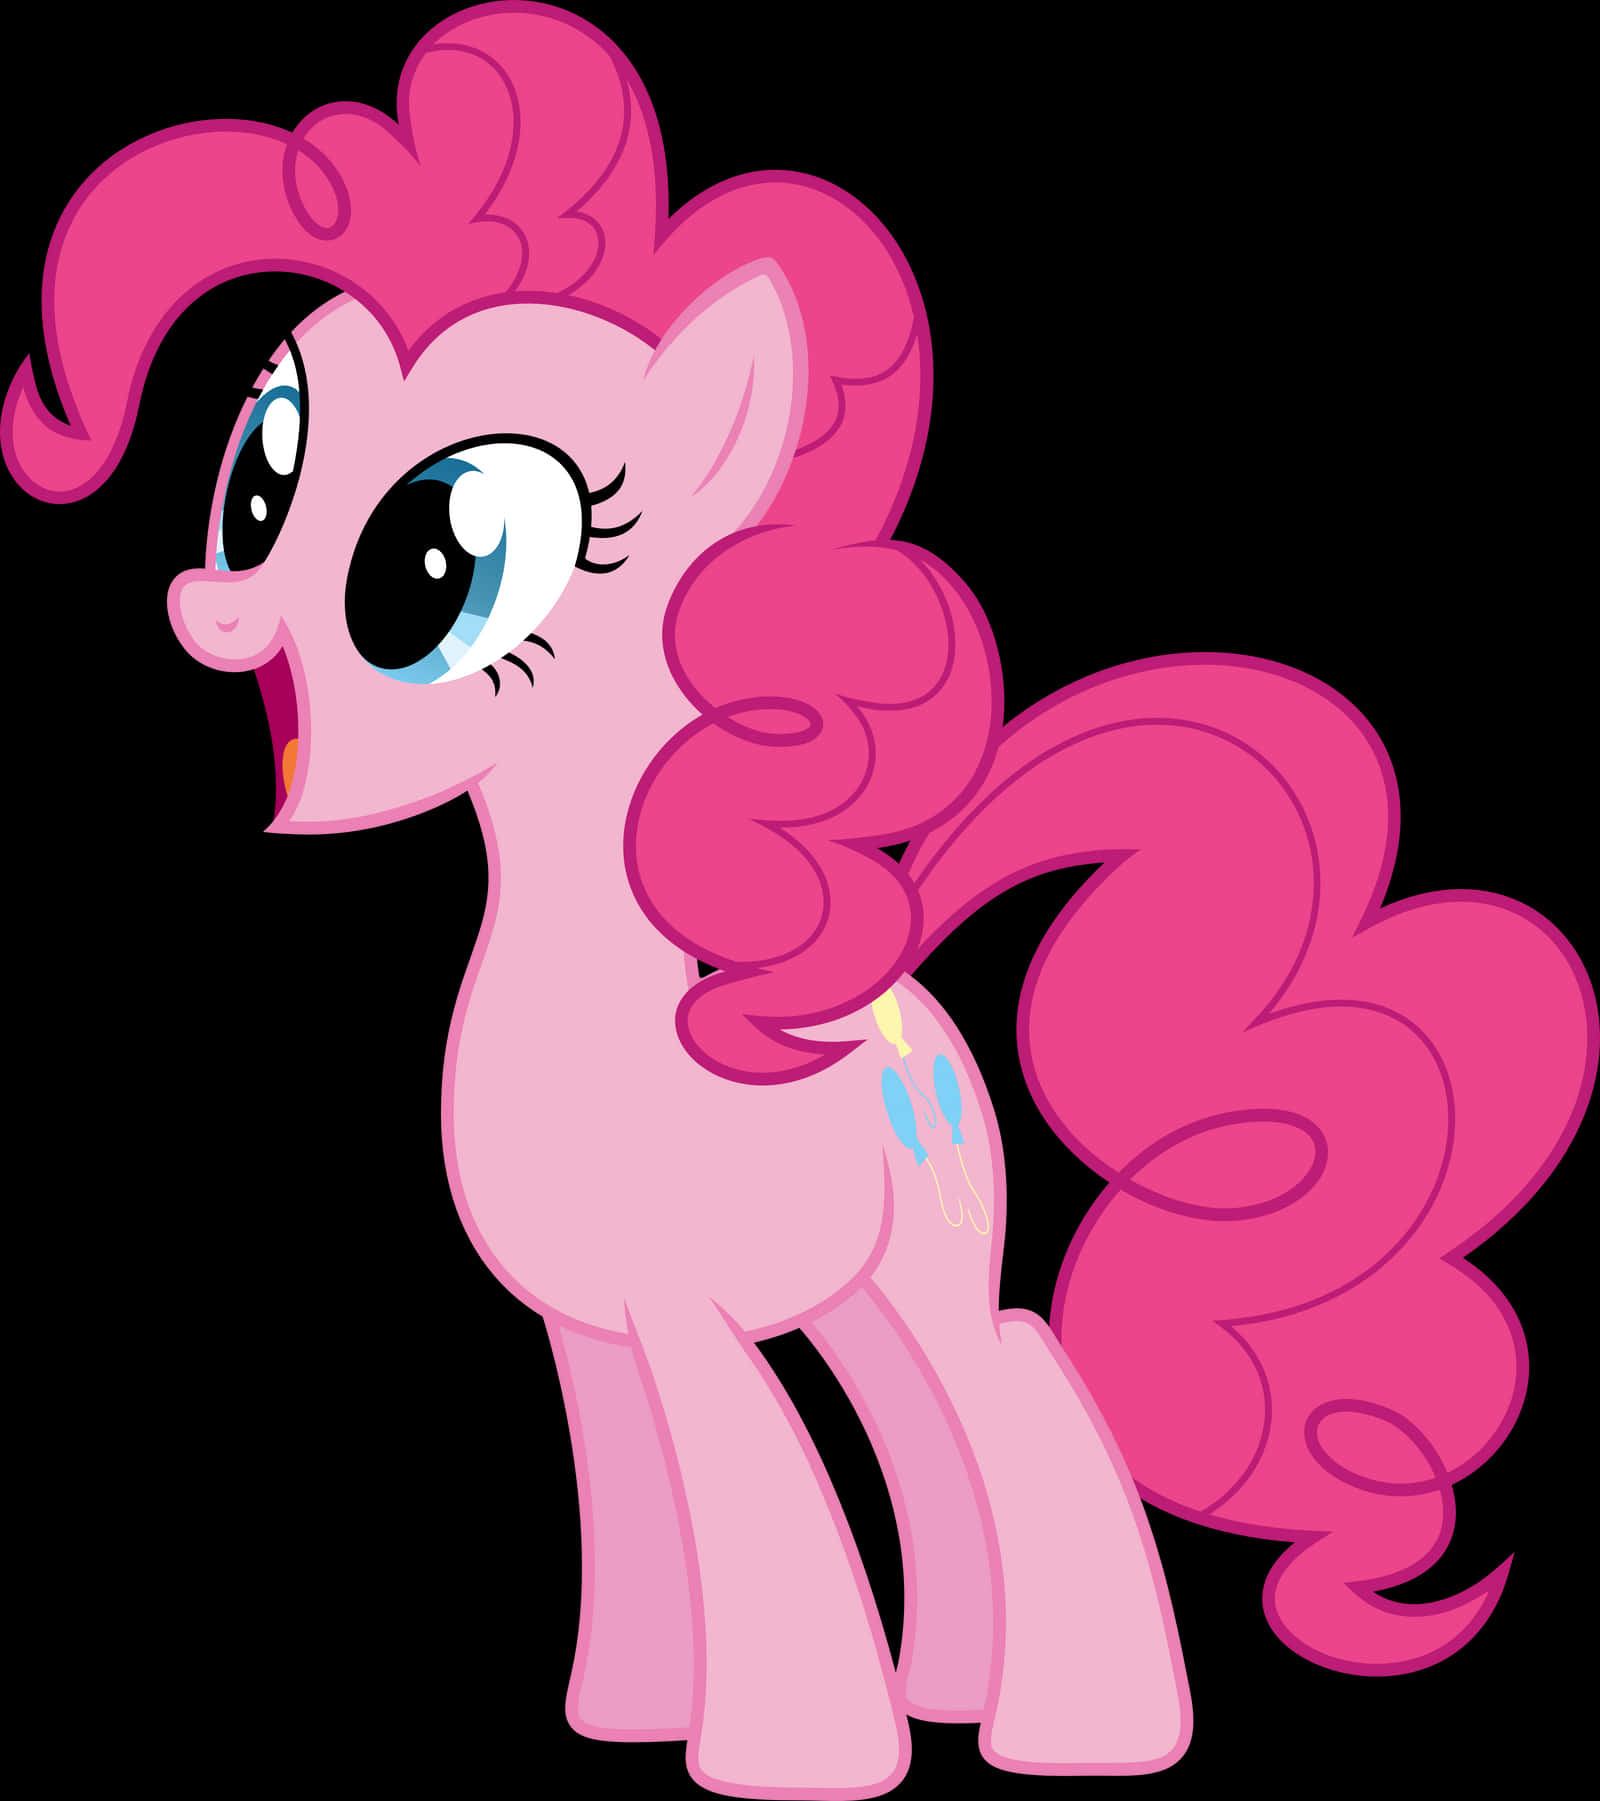 A Pink Pony With Big Eyes And Big Hair